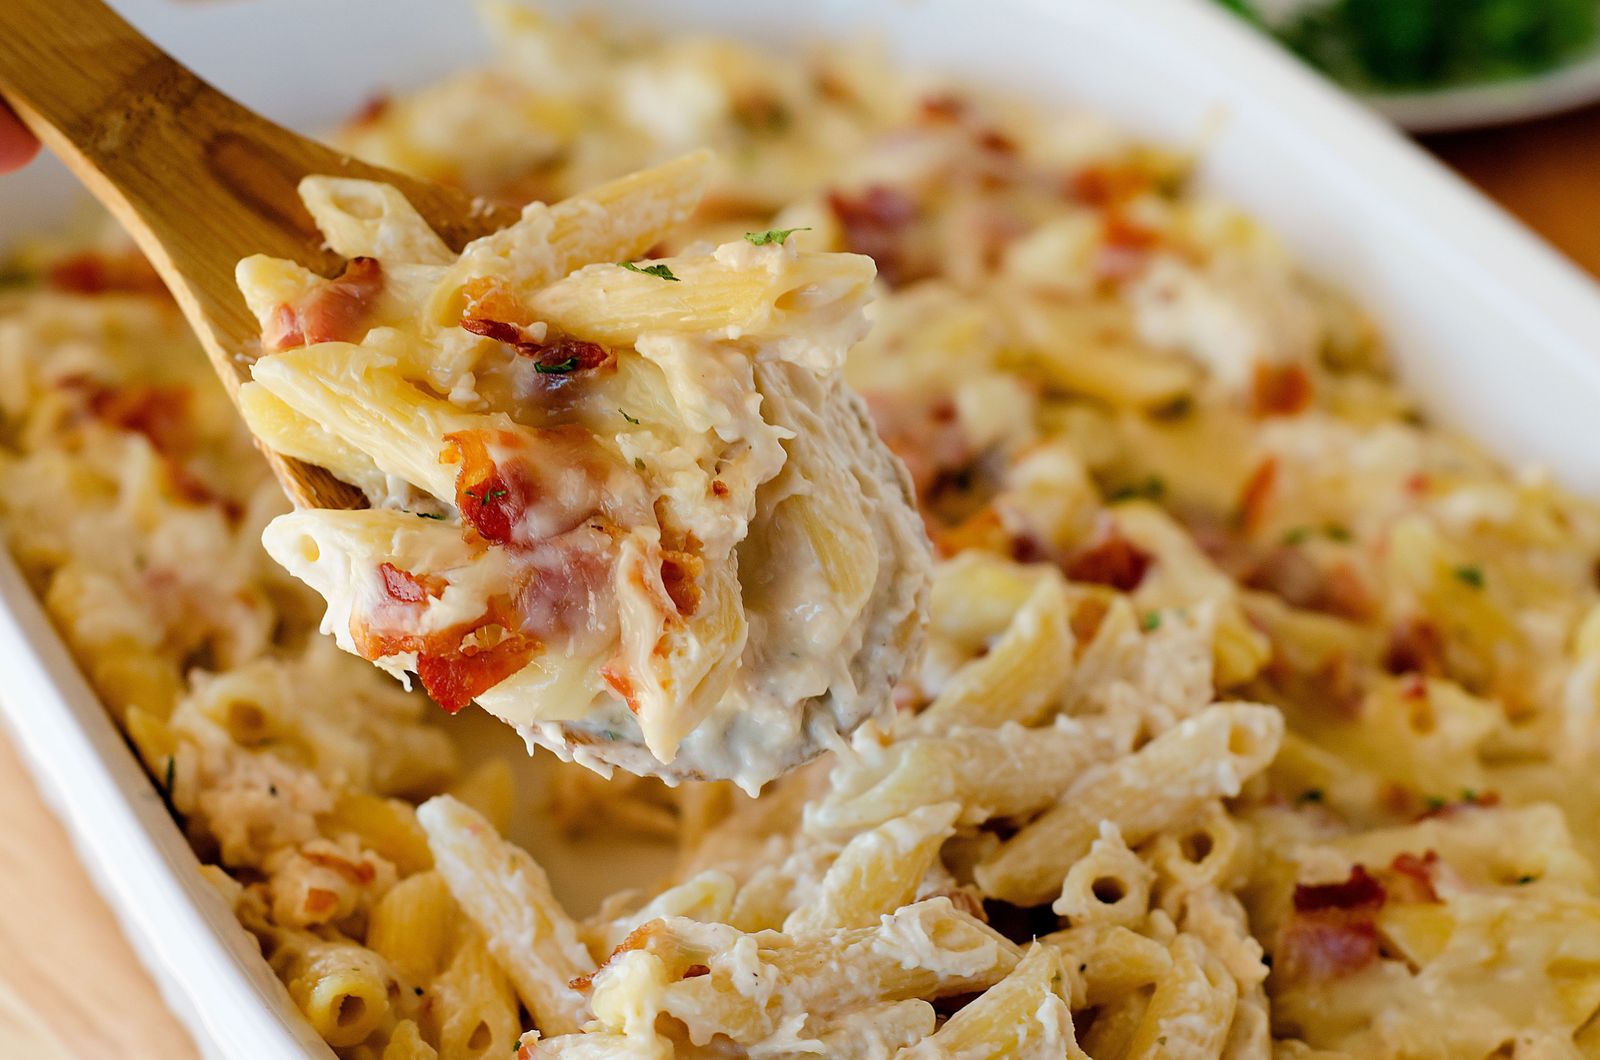 https://life-in-the-lofthouse.com/chicken-bacon-ranch-baked-penne/